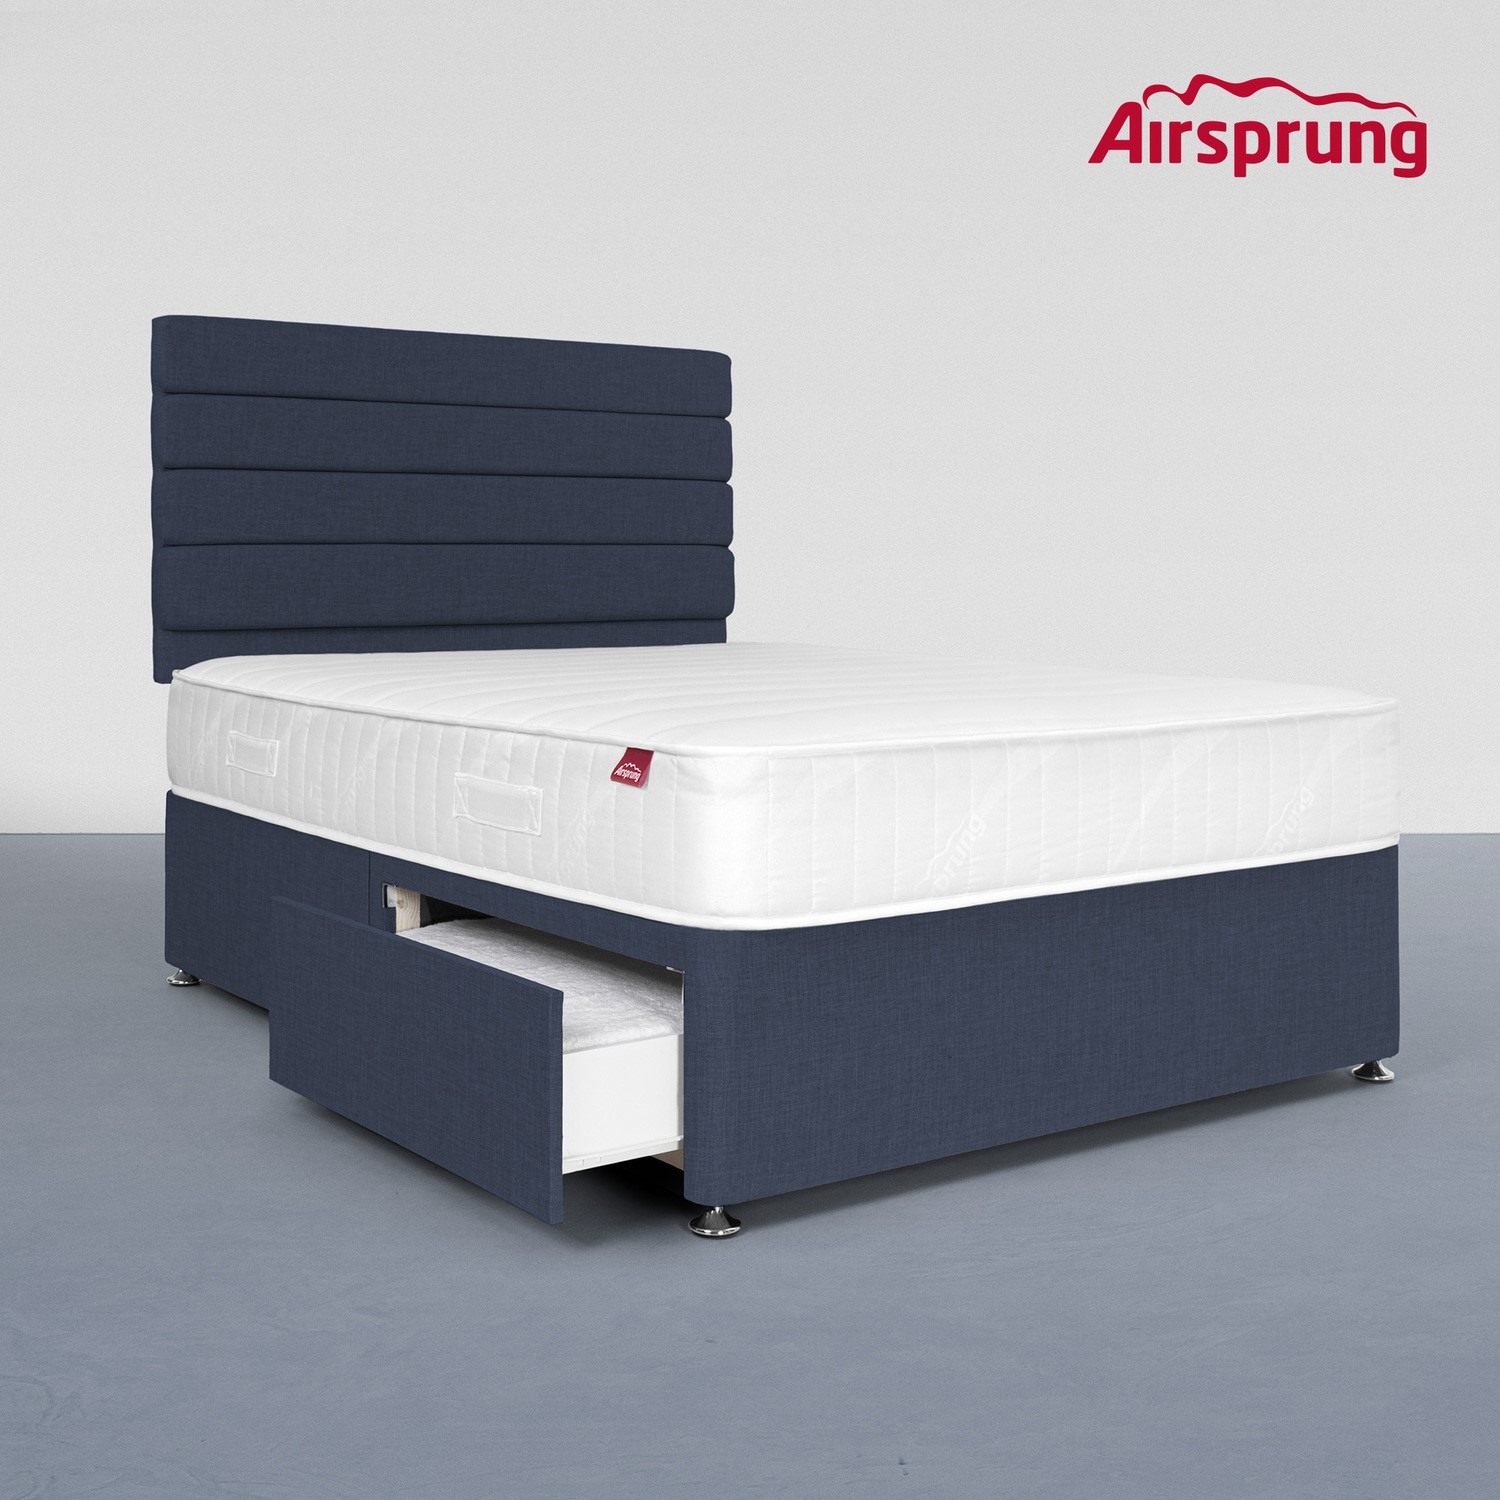 Read more about Airsprung king size 2 drawer divan bed with comfort mattress midnight blue